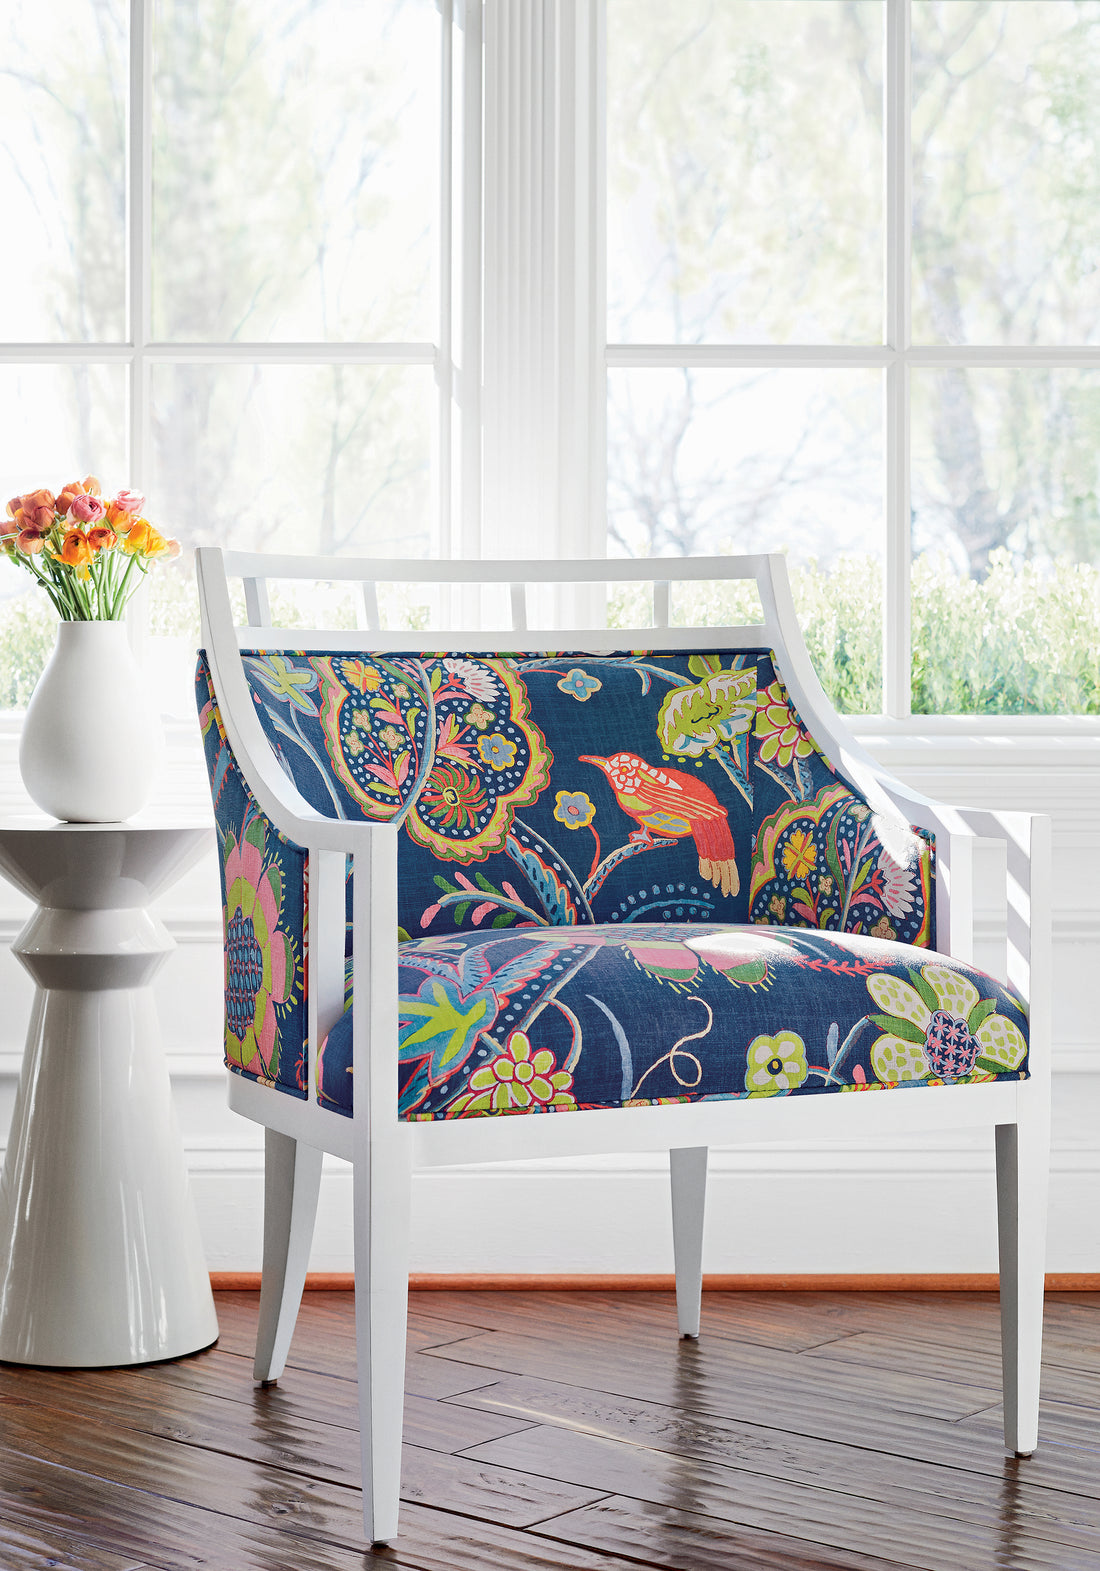 Malibu Chair upholstered with Thibaut Windsor printed fabric in Navy color - pattern number F914303